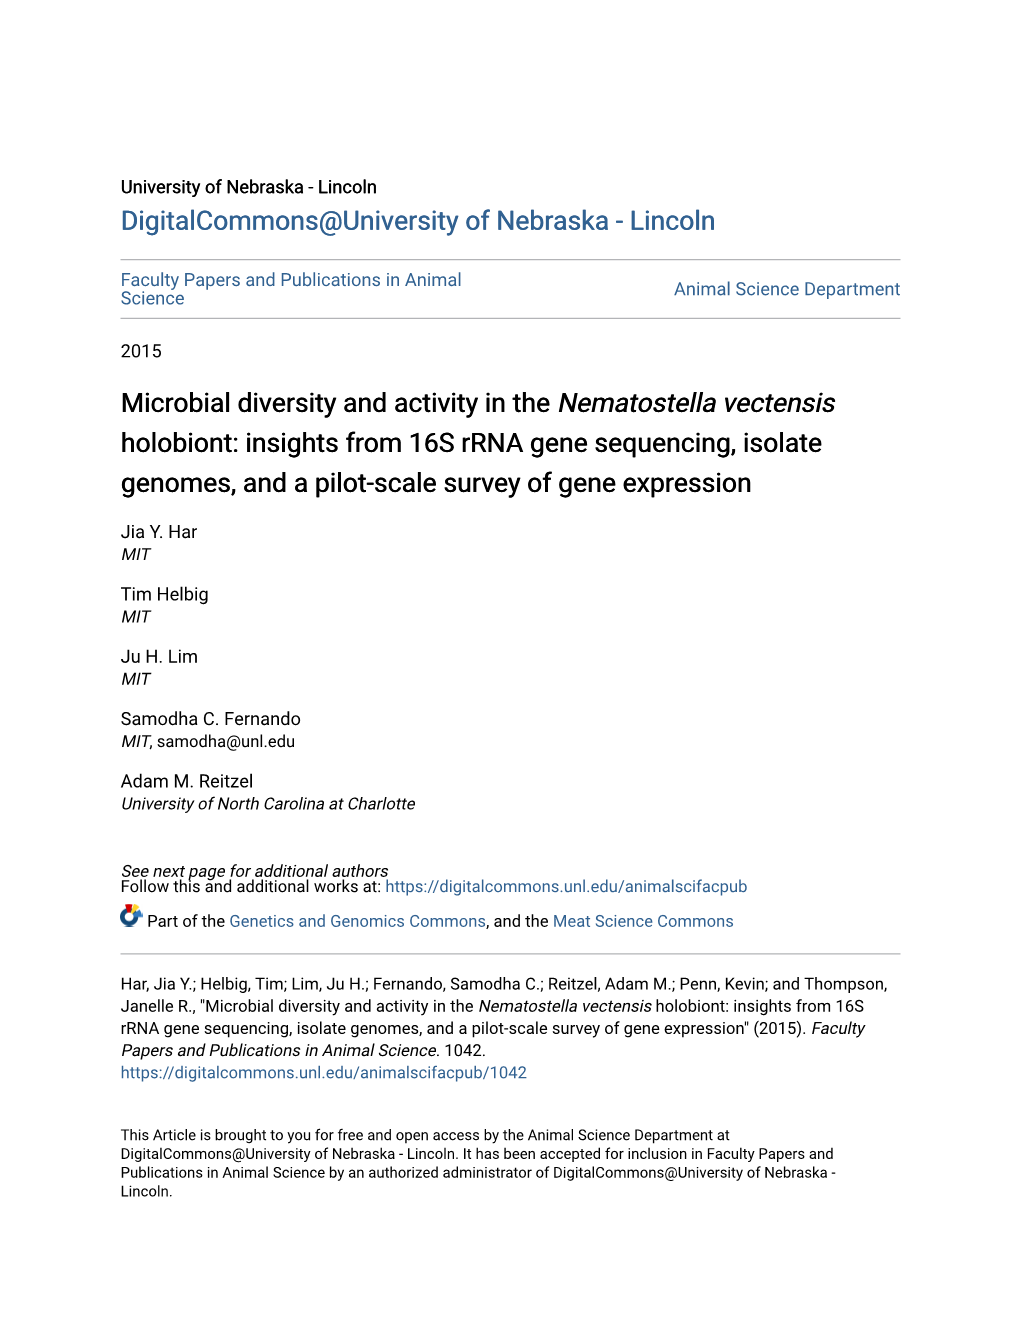 Microbial Diversity and Activity in the &lt;I&gt;Nematostella Vectensis&lt;/I